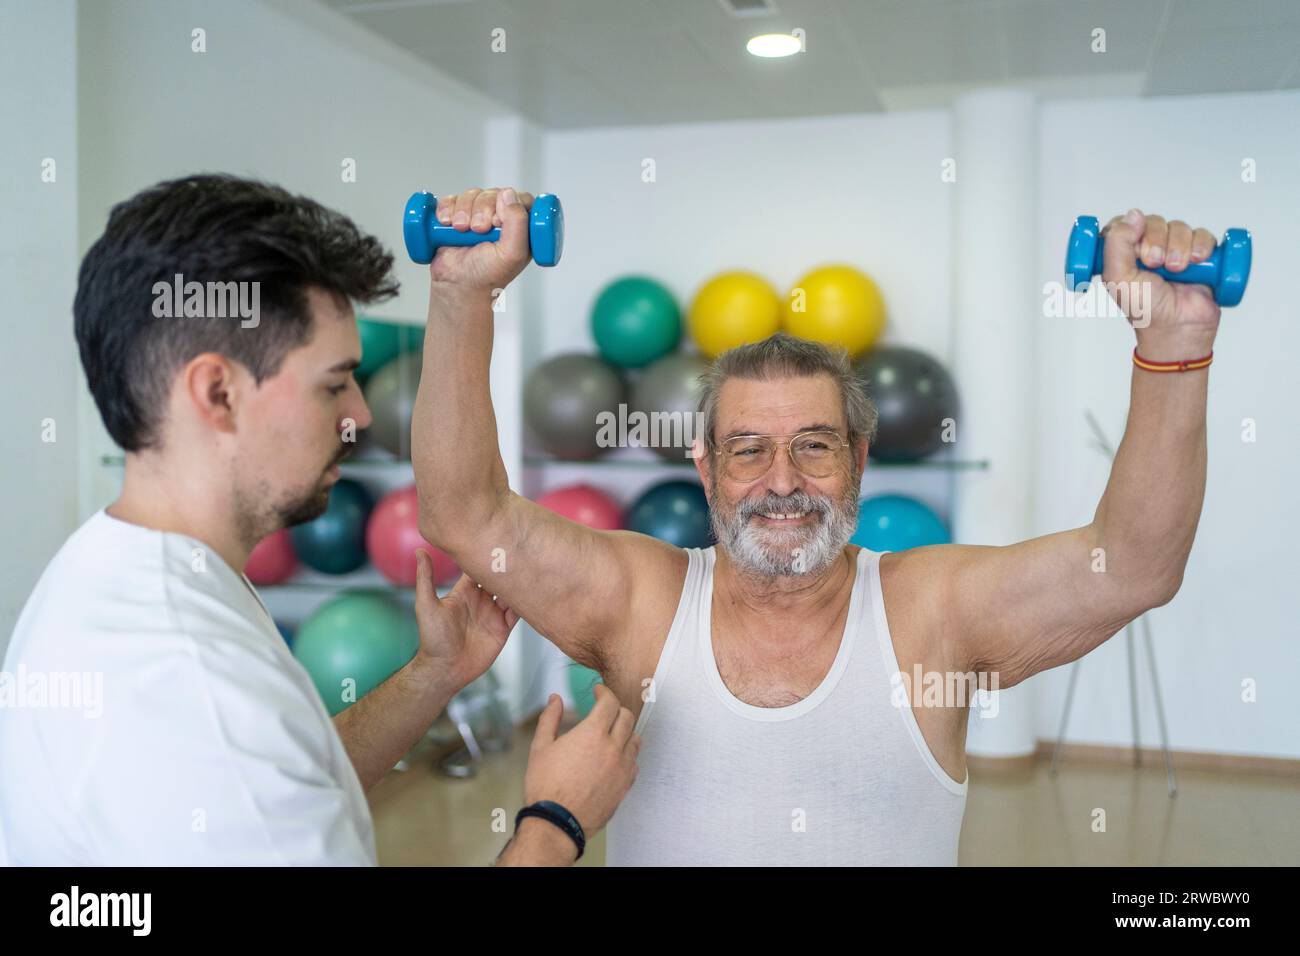 Serious male therapist in uniform helping elderly patient to do exercise with dumbbells during rehabilitation process in modern clinic center Stock Photo